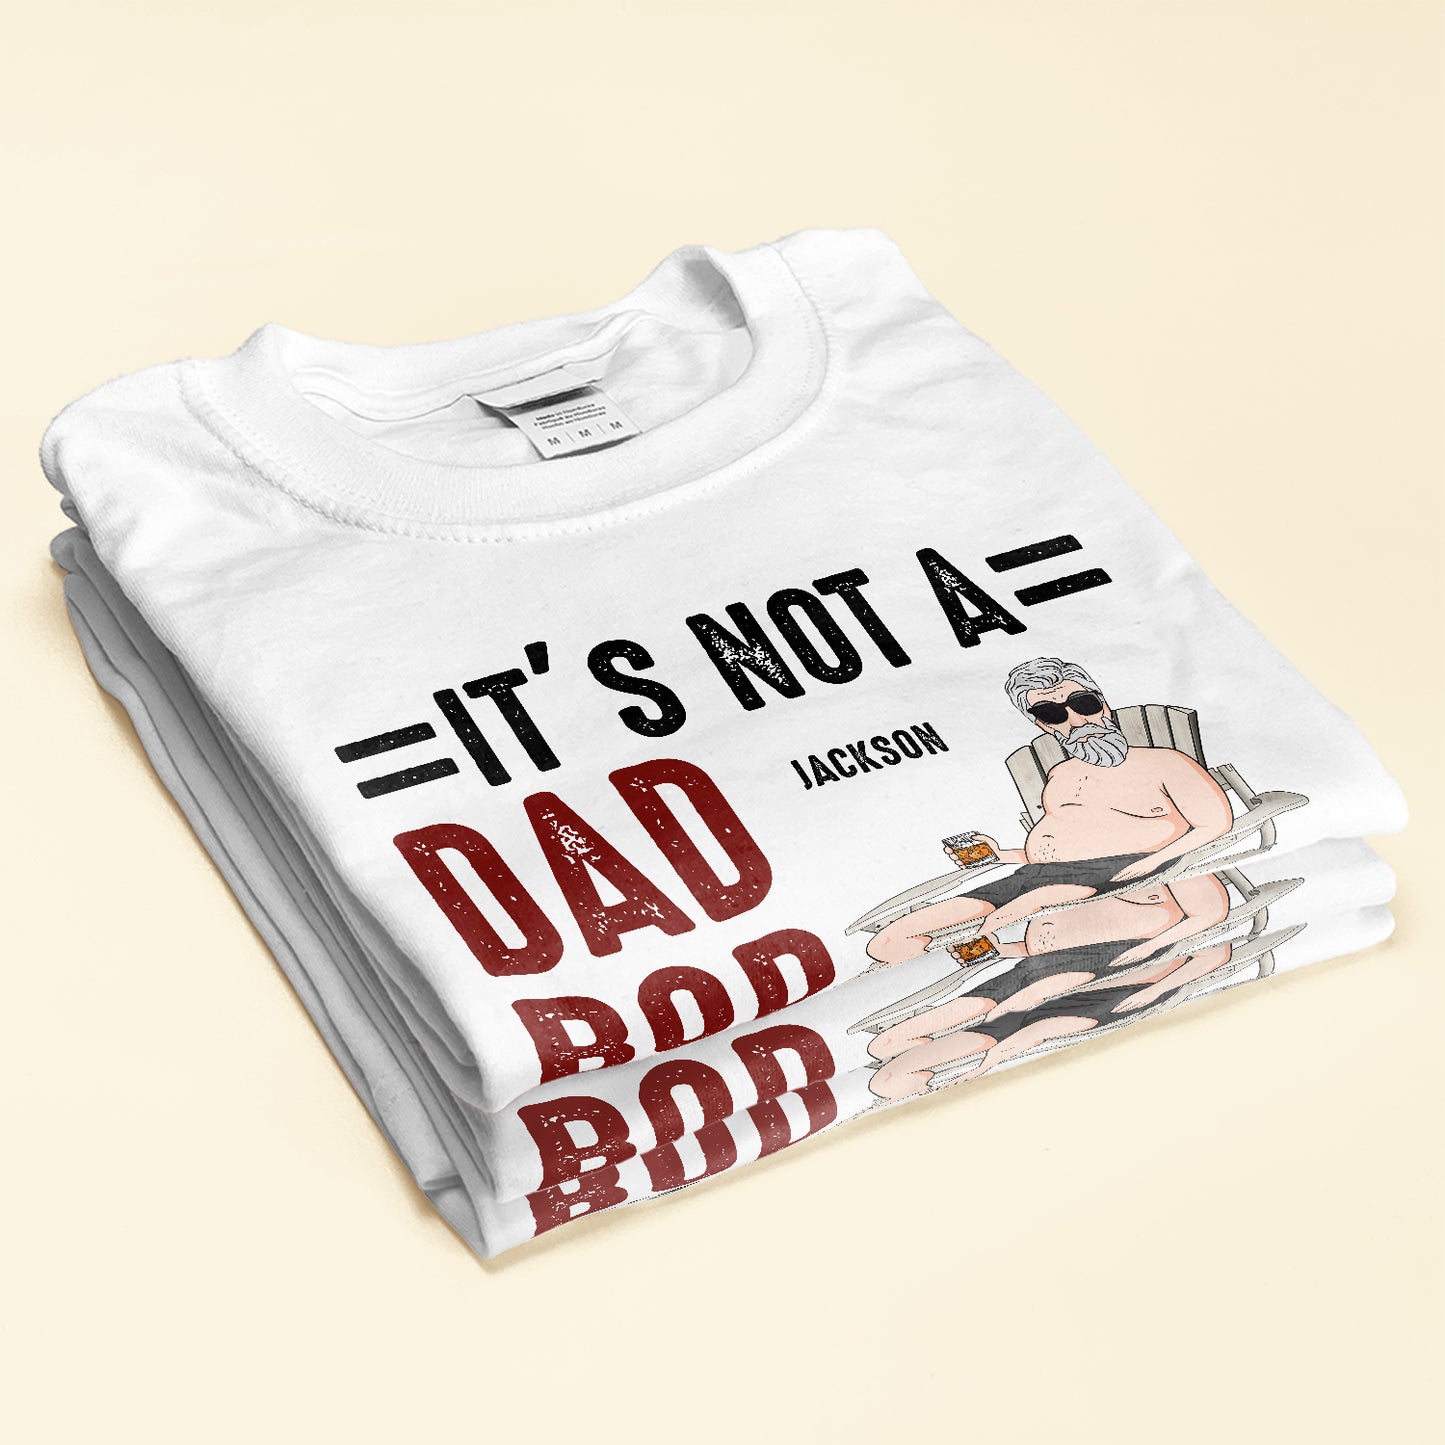 Father Figure Not Dad Bod - Personalized Shirt - Birthday, Father's Day Gift For Dad, Dad Bod, Father, Papa